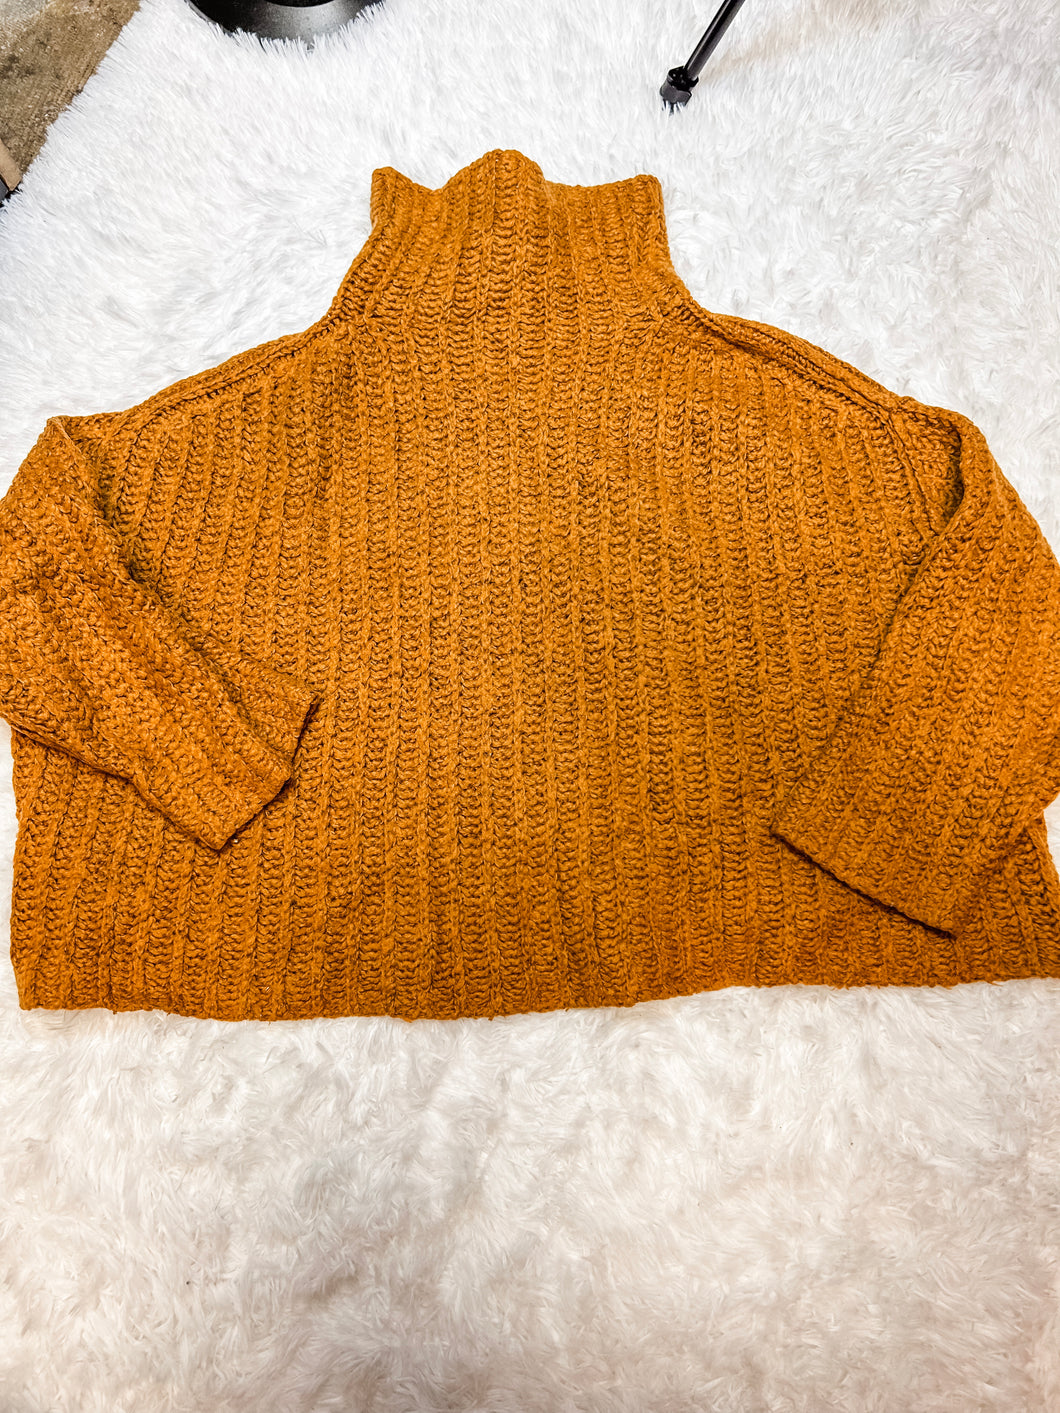 Free People Sweater Size Extra Small M0375